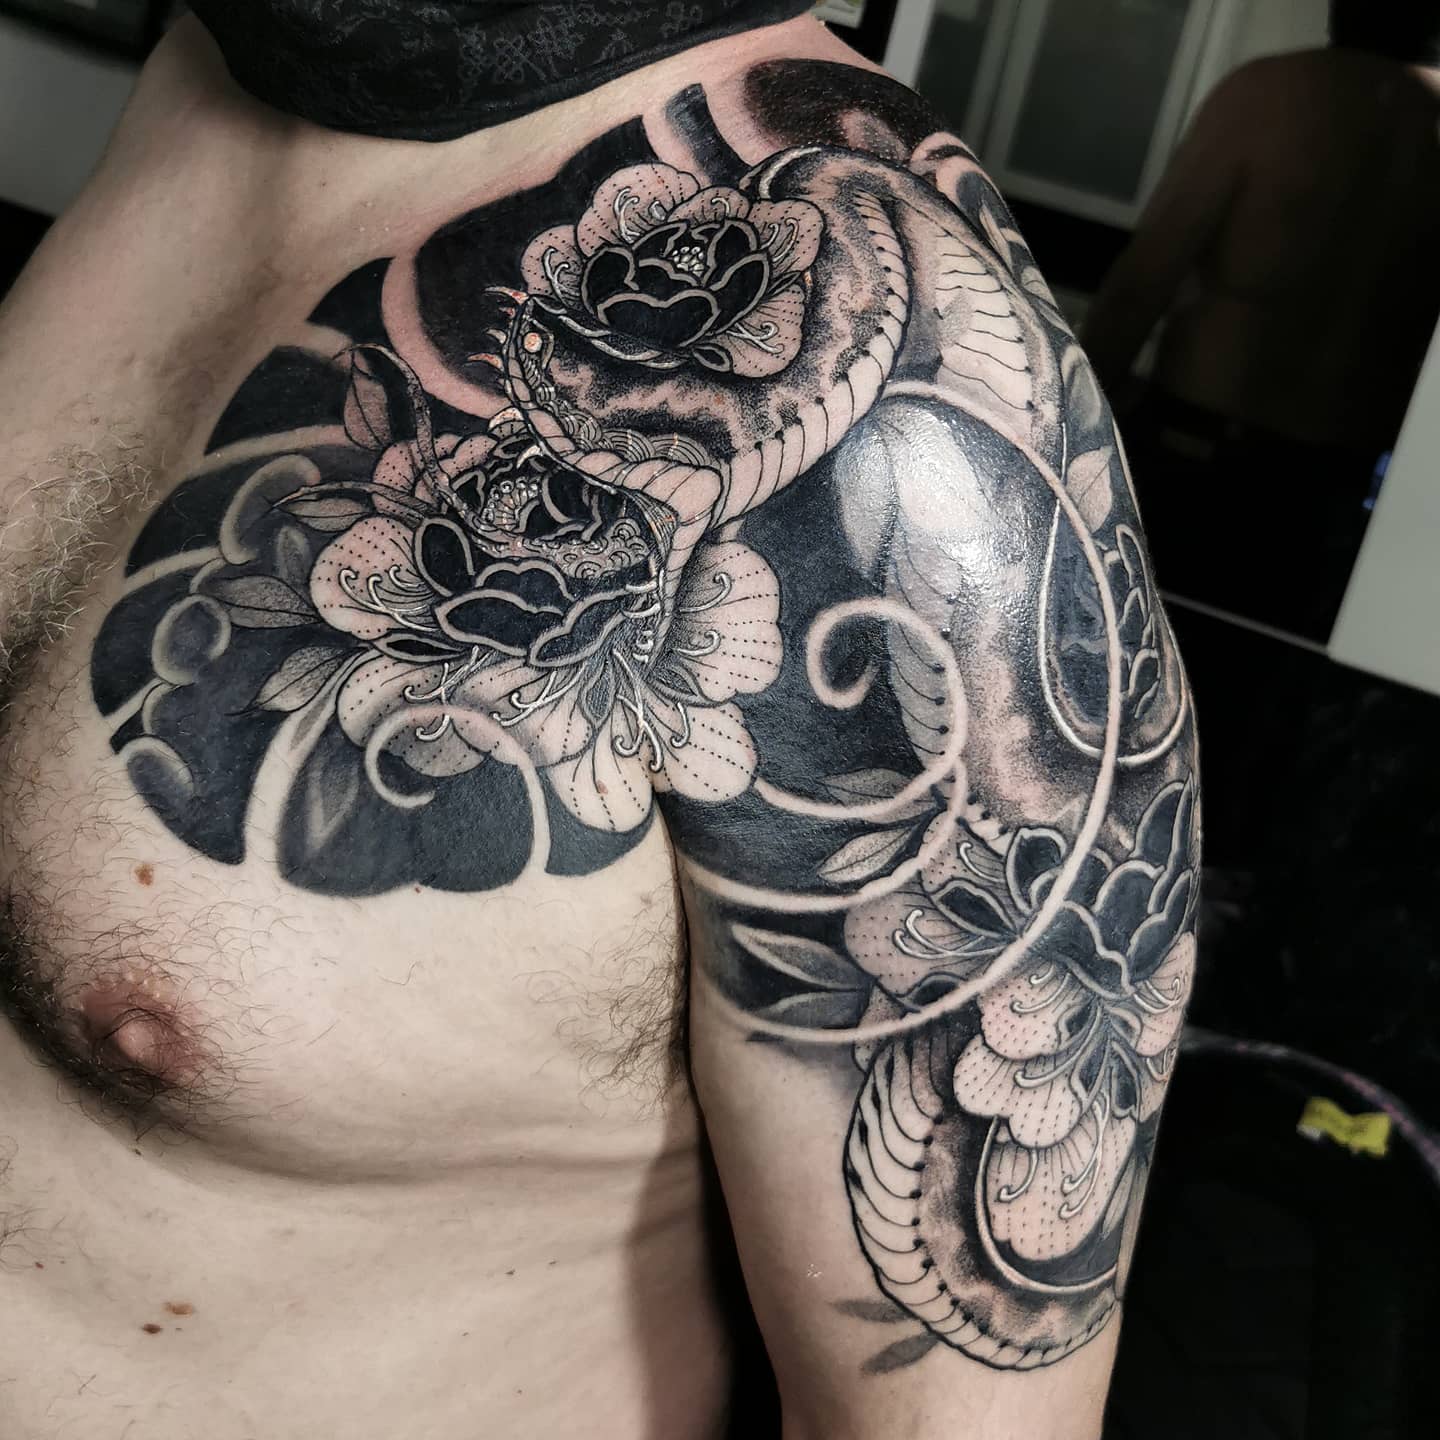 One i forgot to post
Finished  and  half sleeve done studioxiiigallery in   cant wait for covid to f#?k off so i can go home
. 
.
               